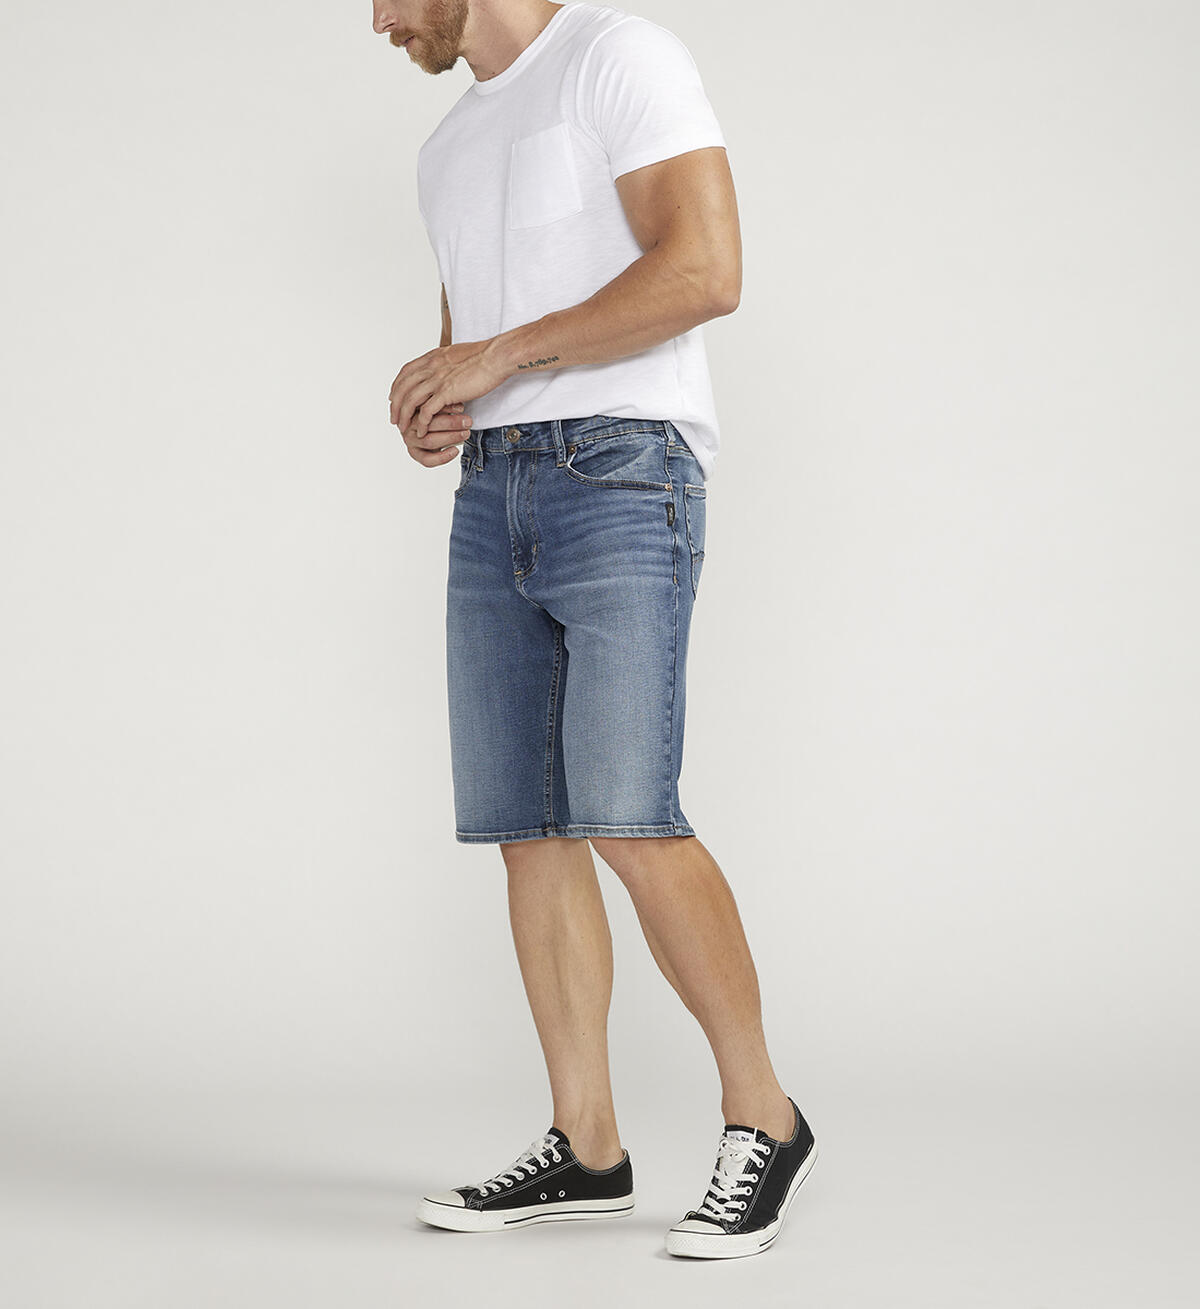 Grayson Relaxed Fit Shorts, , hi-res image number 2